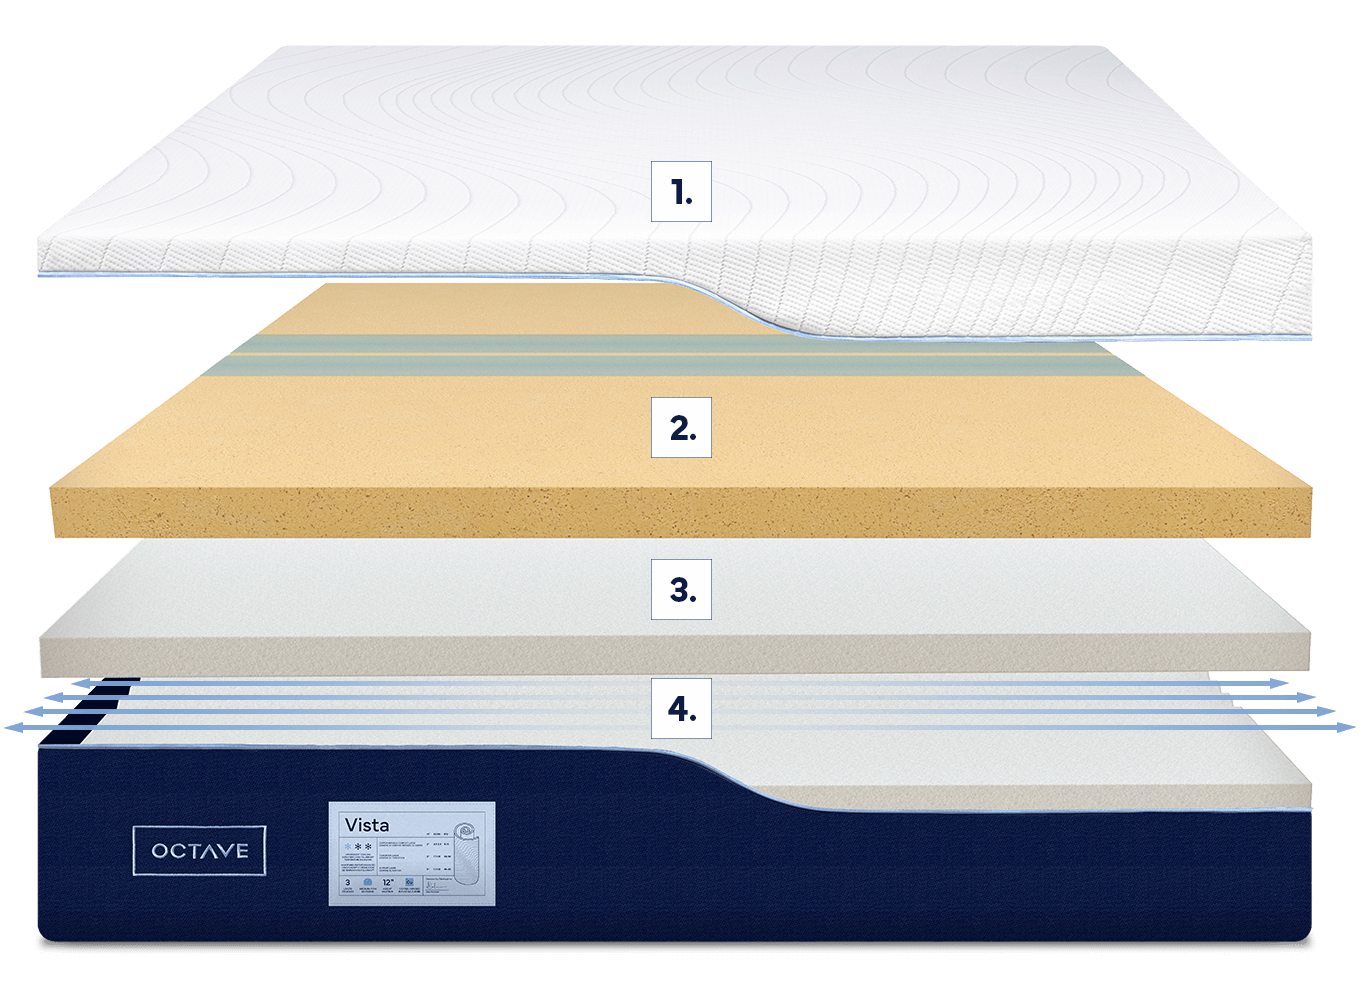 Expanded cutaway view of the 5 specialty foam layers on Octave Vista